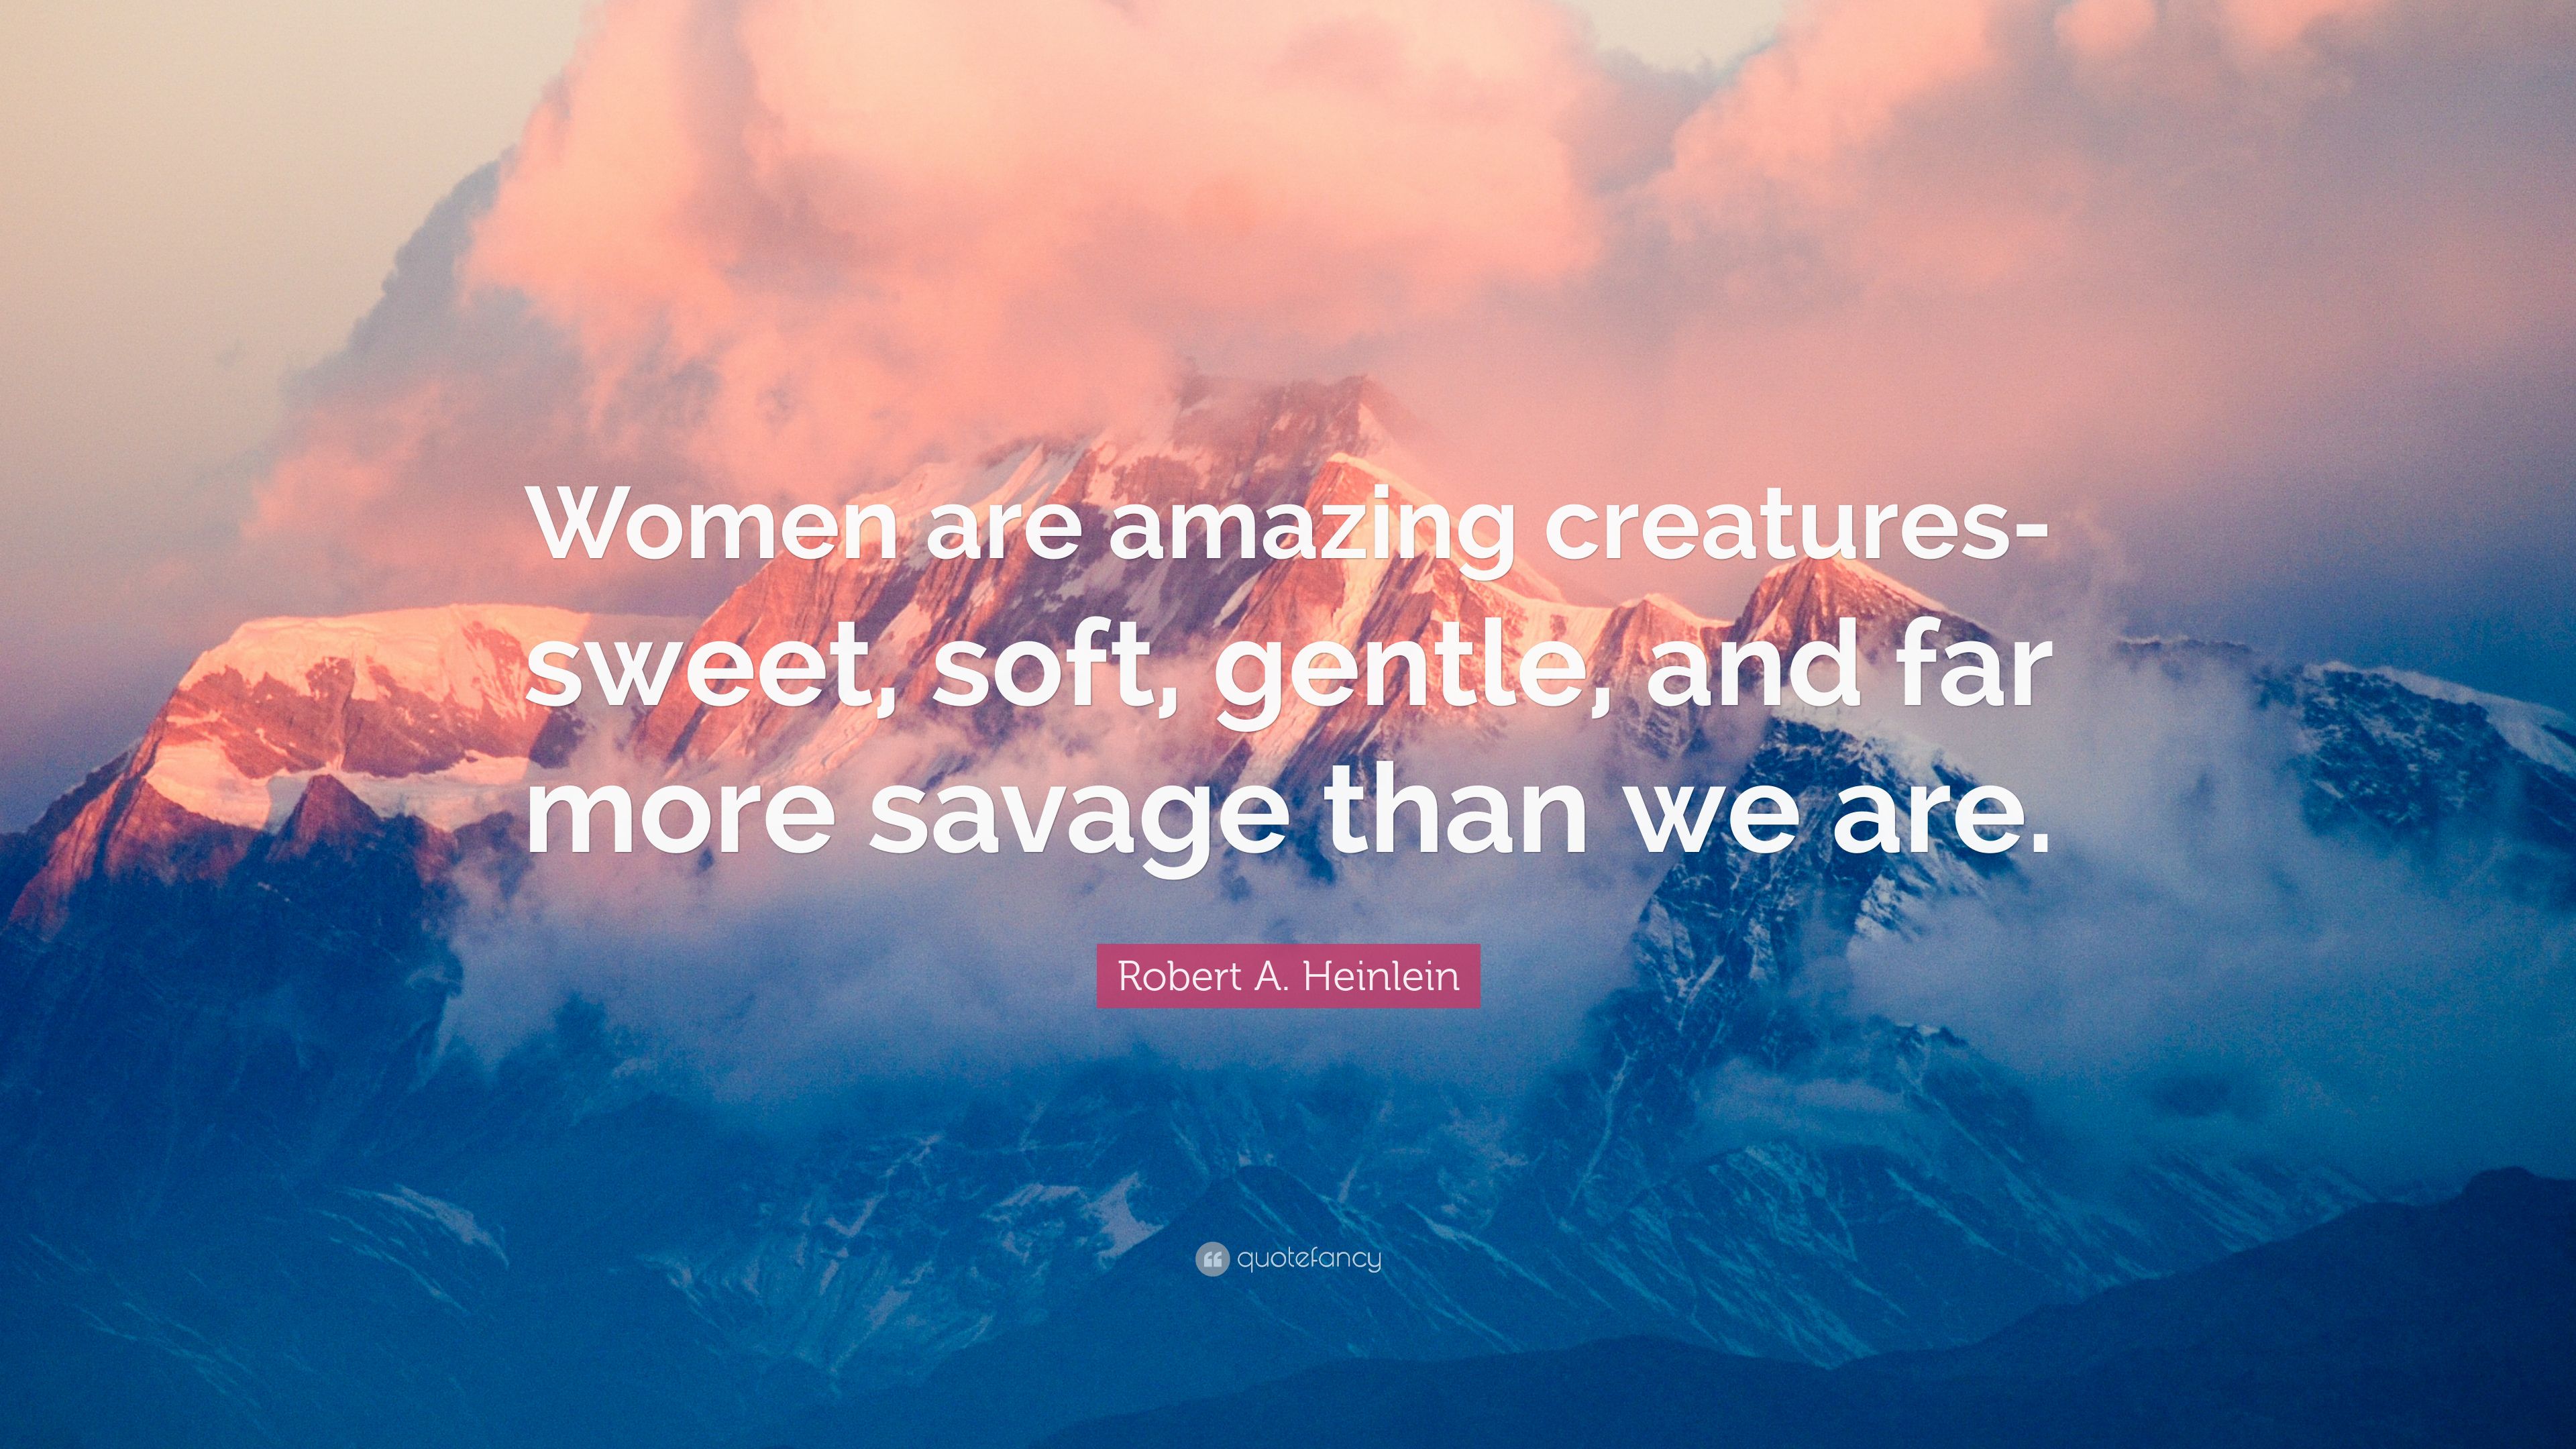 Robert A. Heinlein Quote: “Women Are Amazing Creatures Sweet, Soft, Gentle, And Far More Savage Than